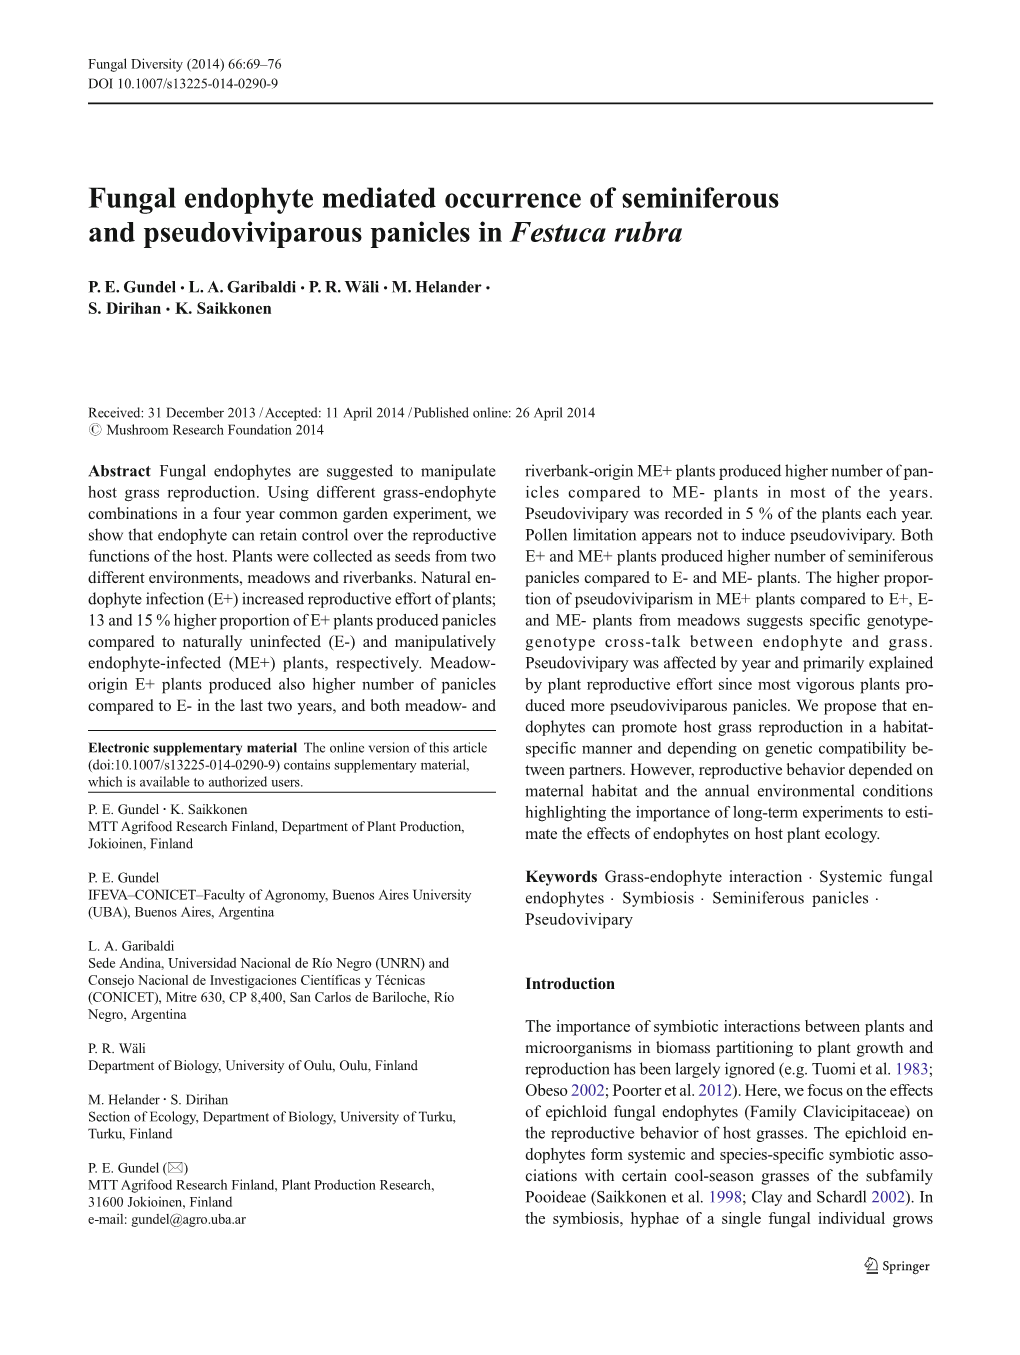 Fungal Endophyte Mediated Occurrence of Seminiferous and Pseudoviviparous Panicles in Festuca Rubra